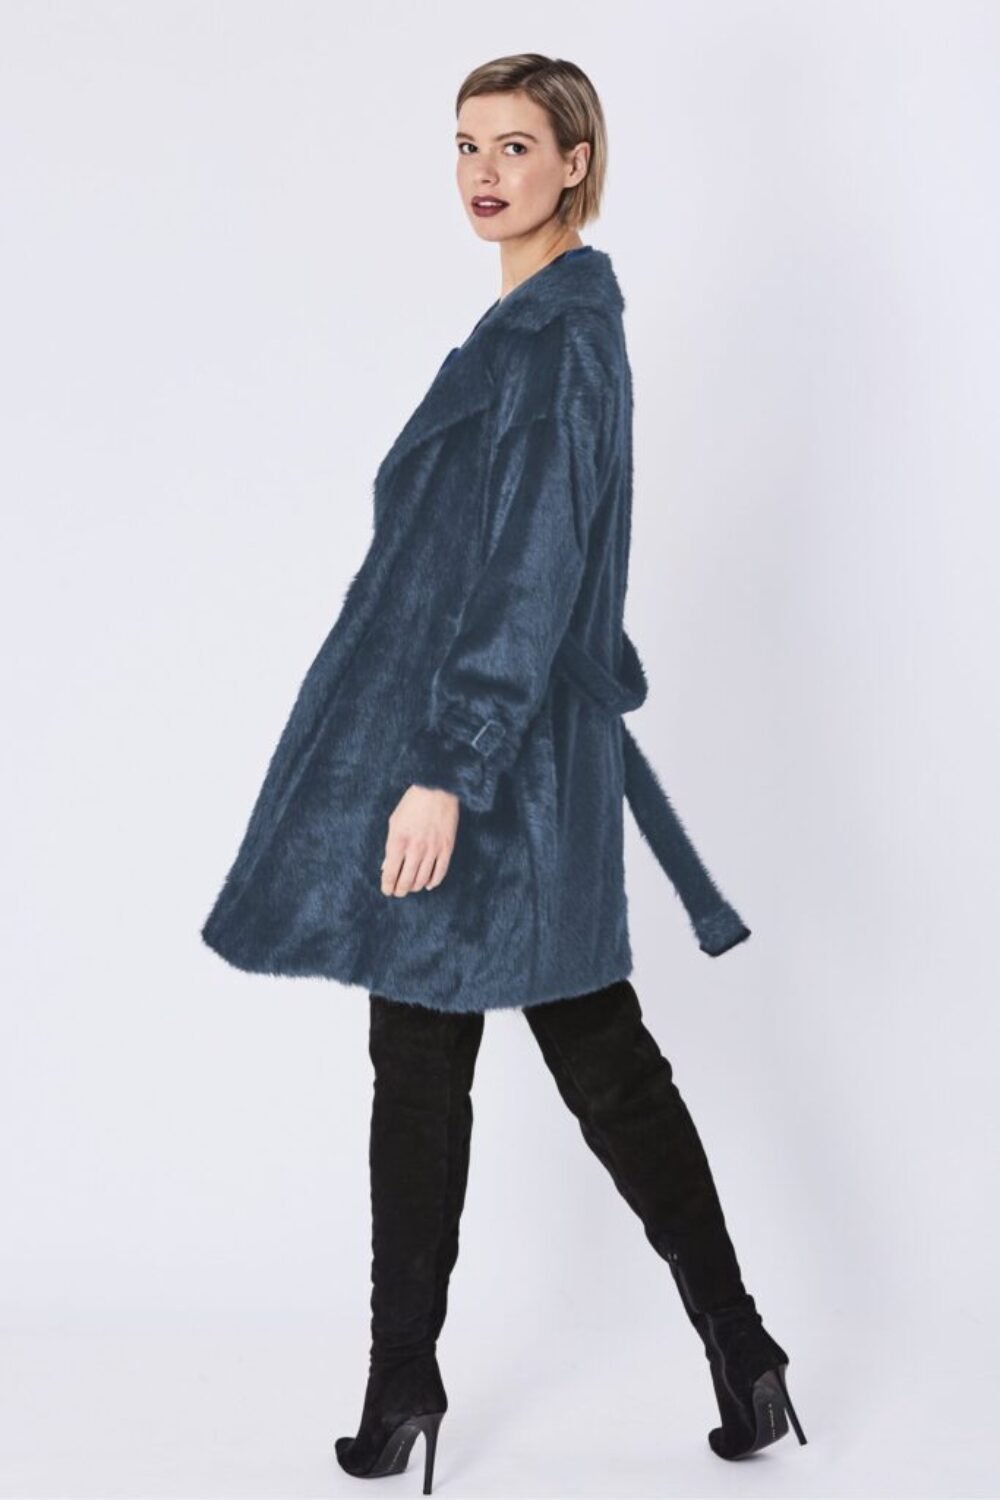 Shop Lux Blue Faux Fur Coat and women's luxury and designer clothes at www.lux-apparel.co.uk